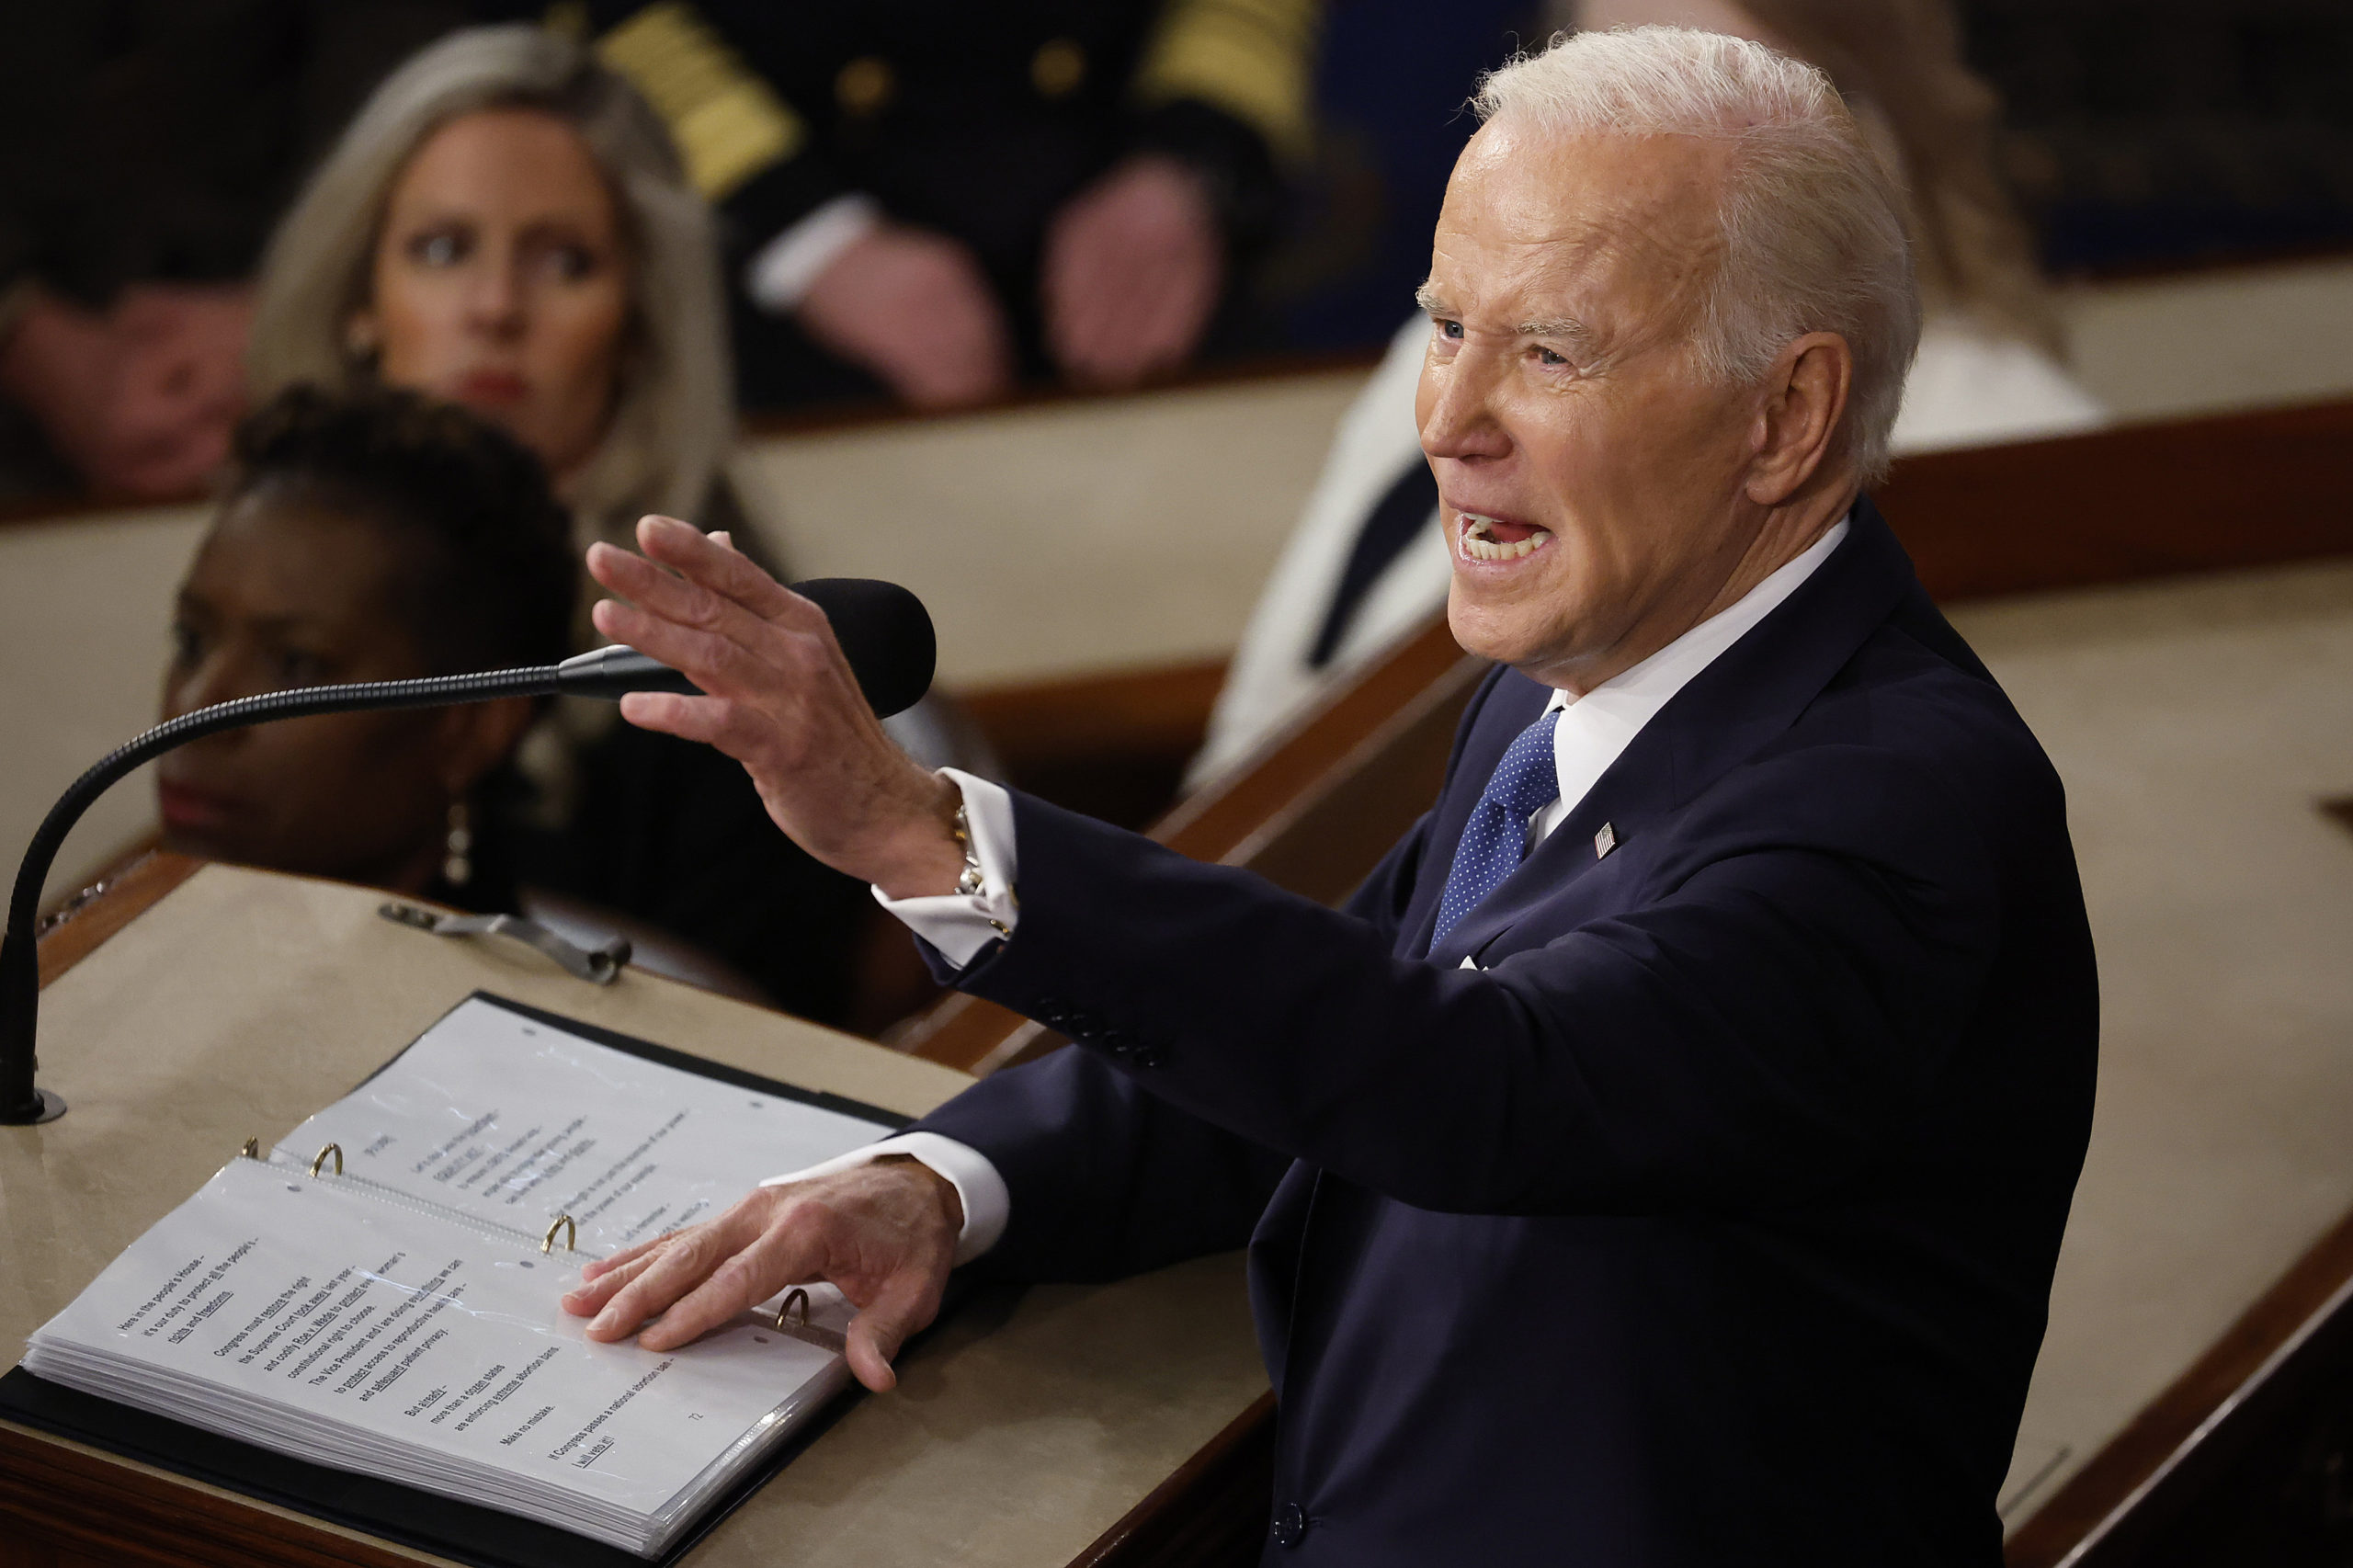 U.S. President Joe Biden delivers the State of the Union address to a joint session of Congress at the U.S. Capitol on February 07, 2023 in Washington, DC.